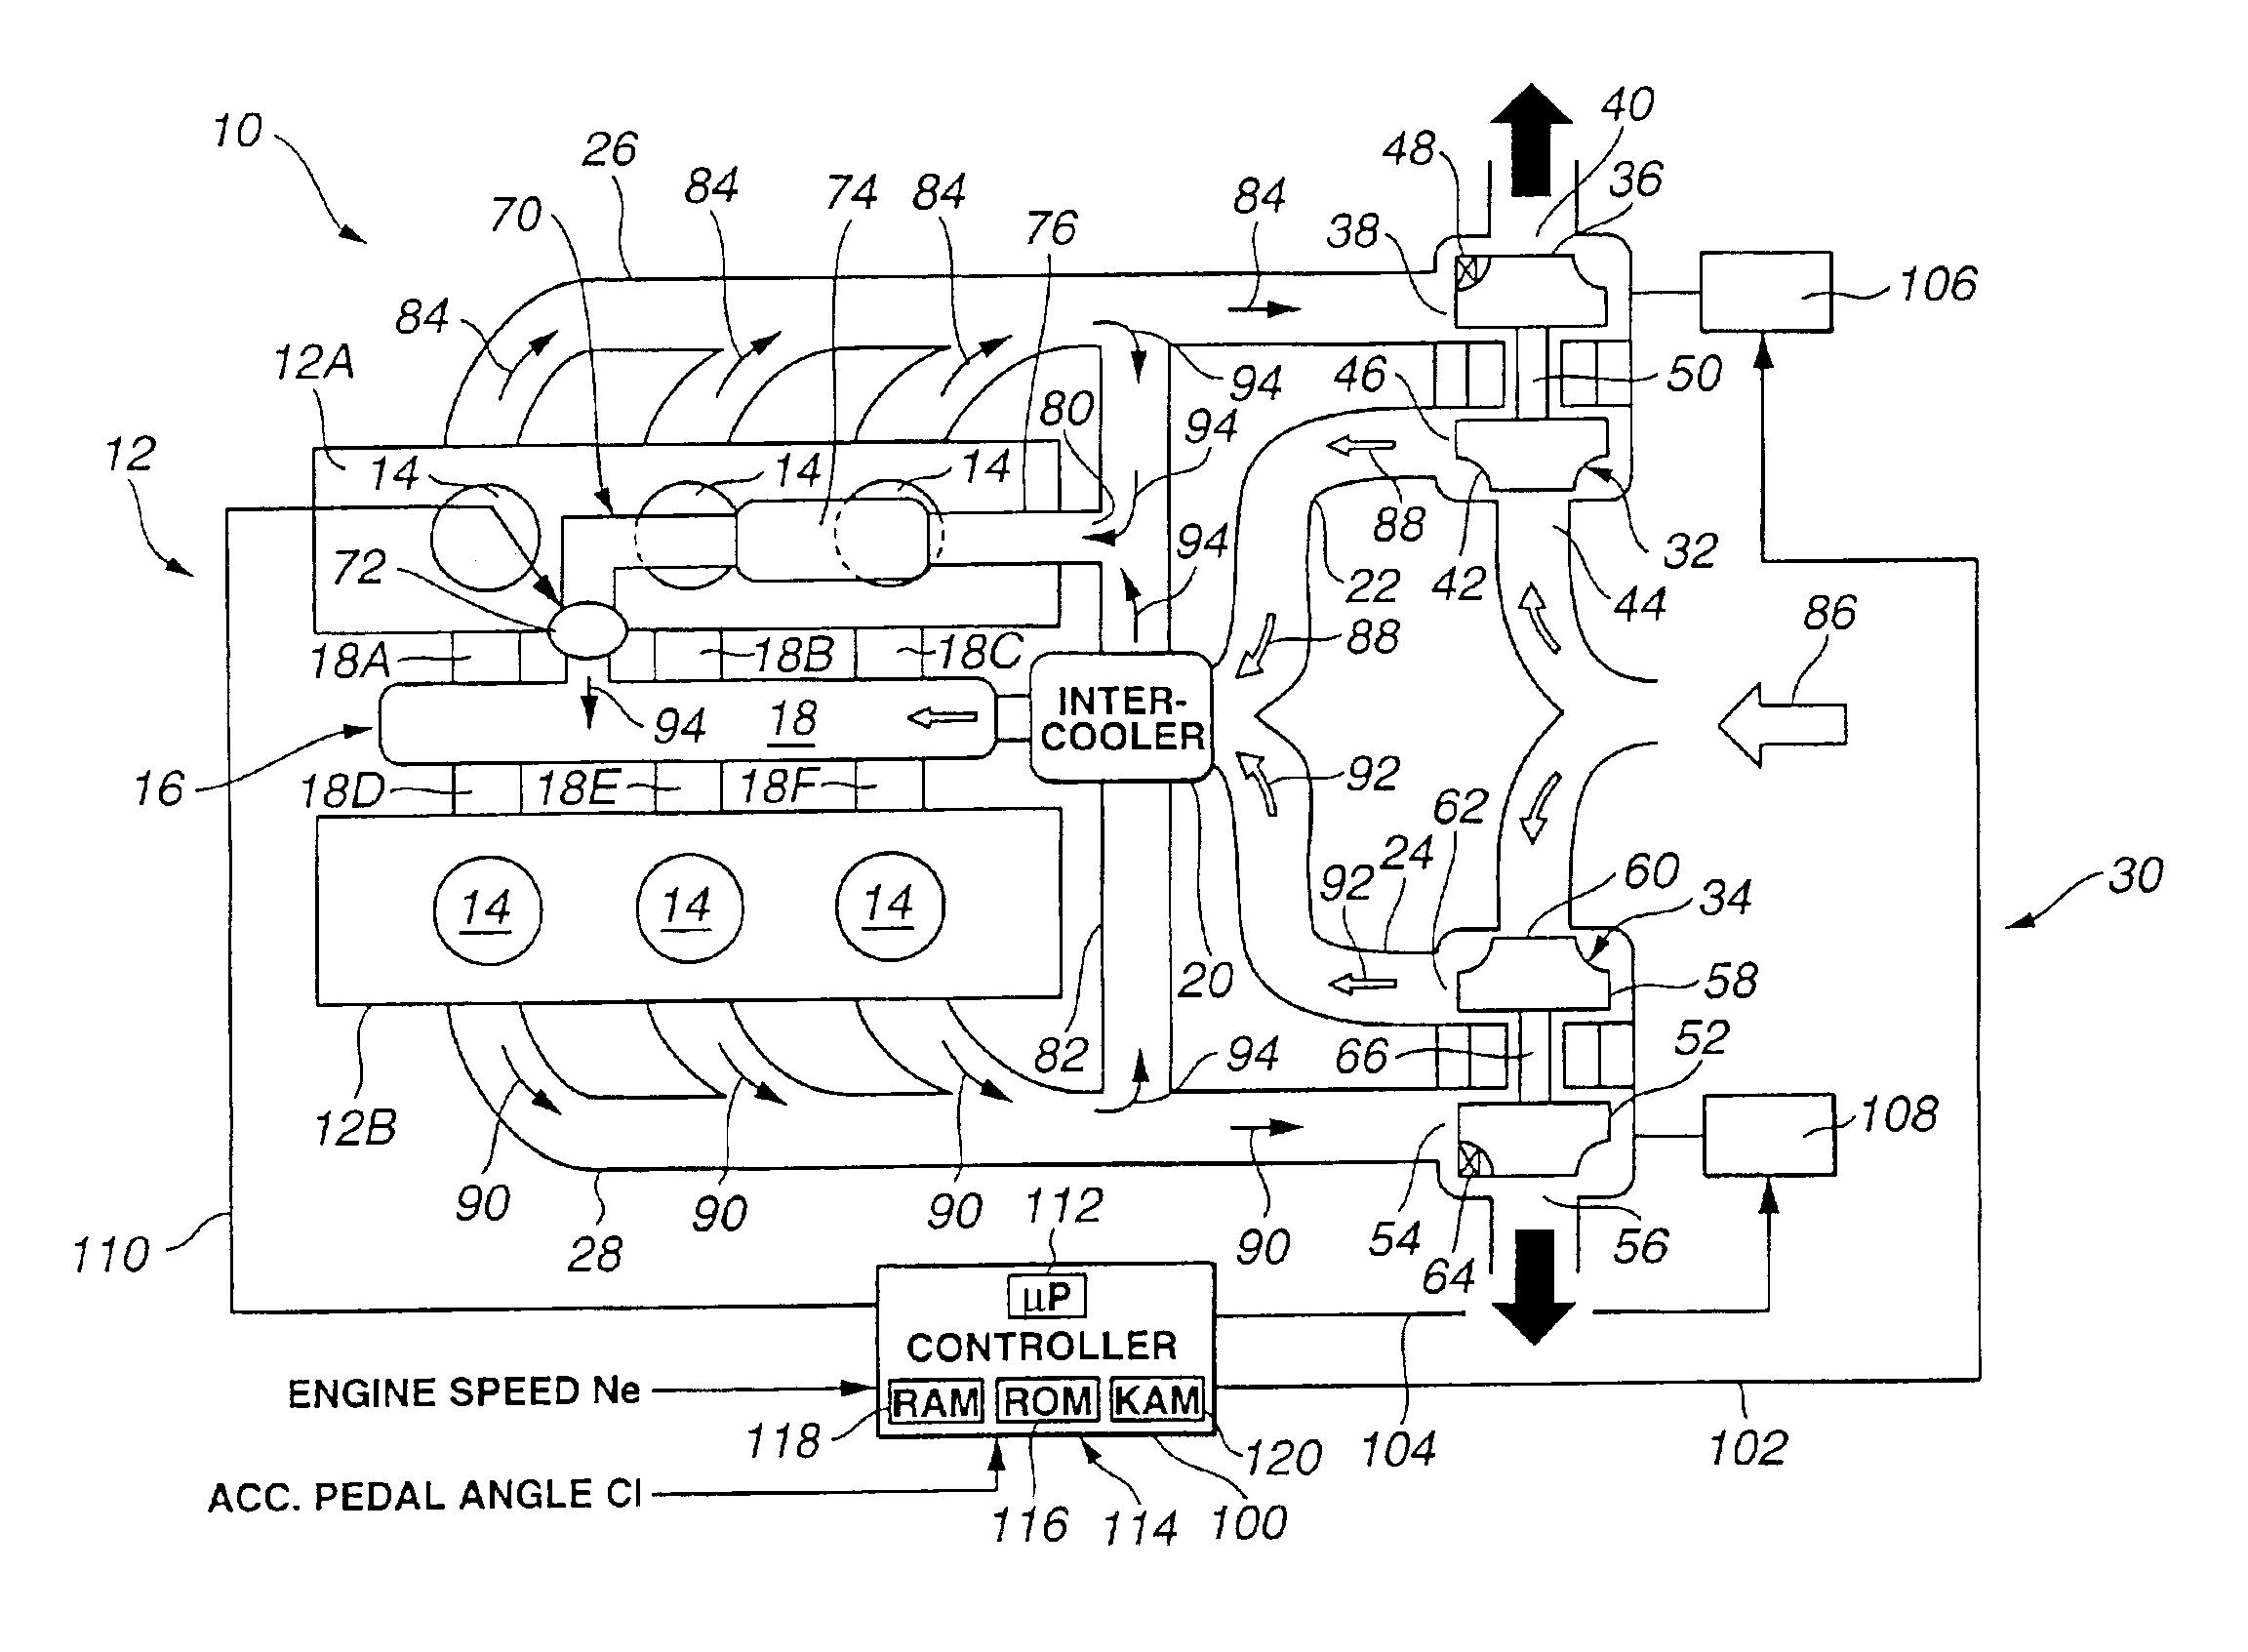 Control of multiple supercharged compression ignition engines having EGR